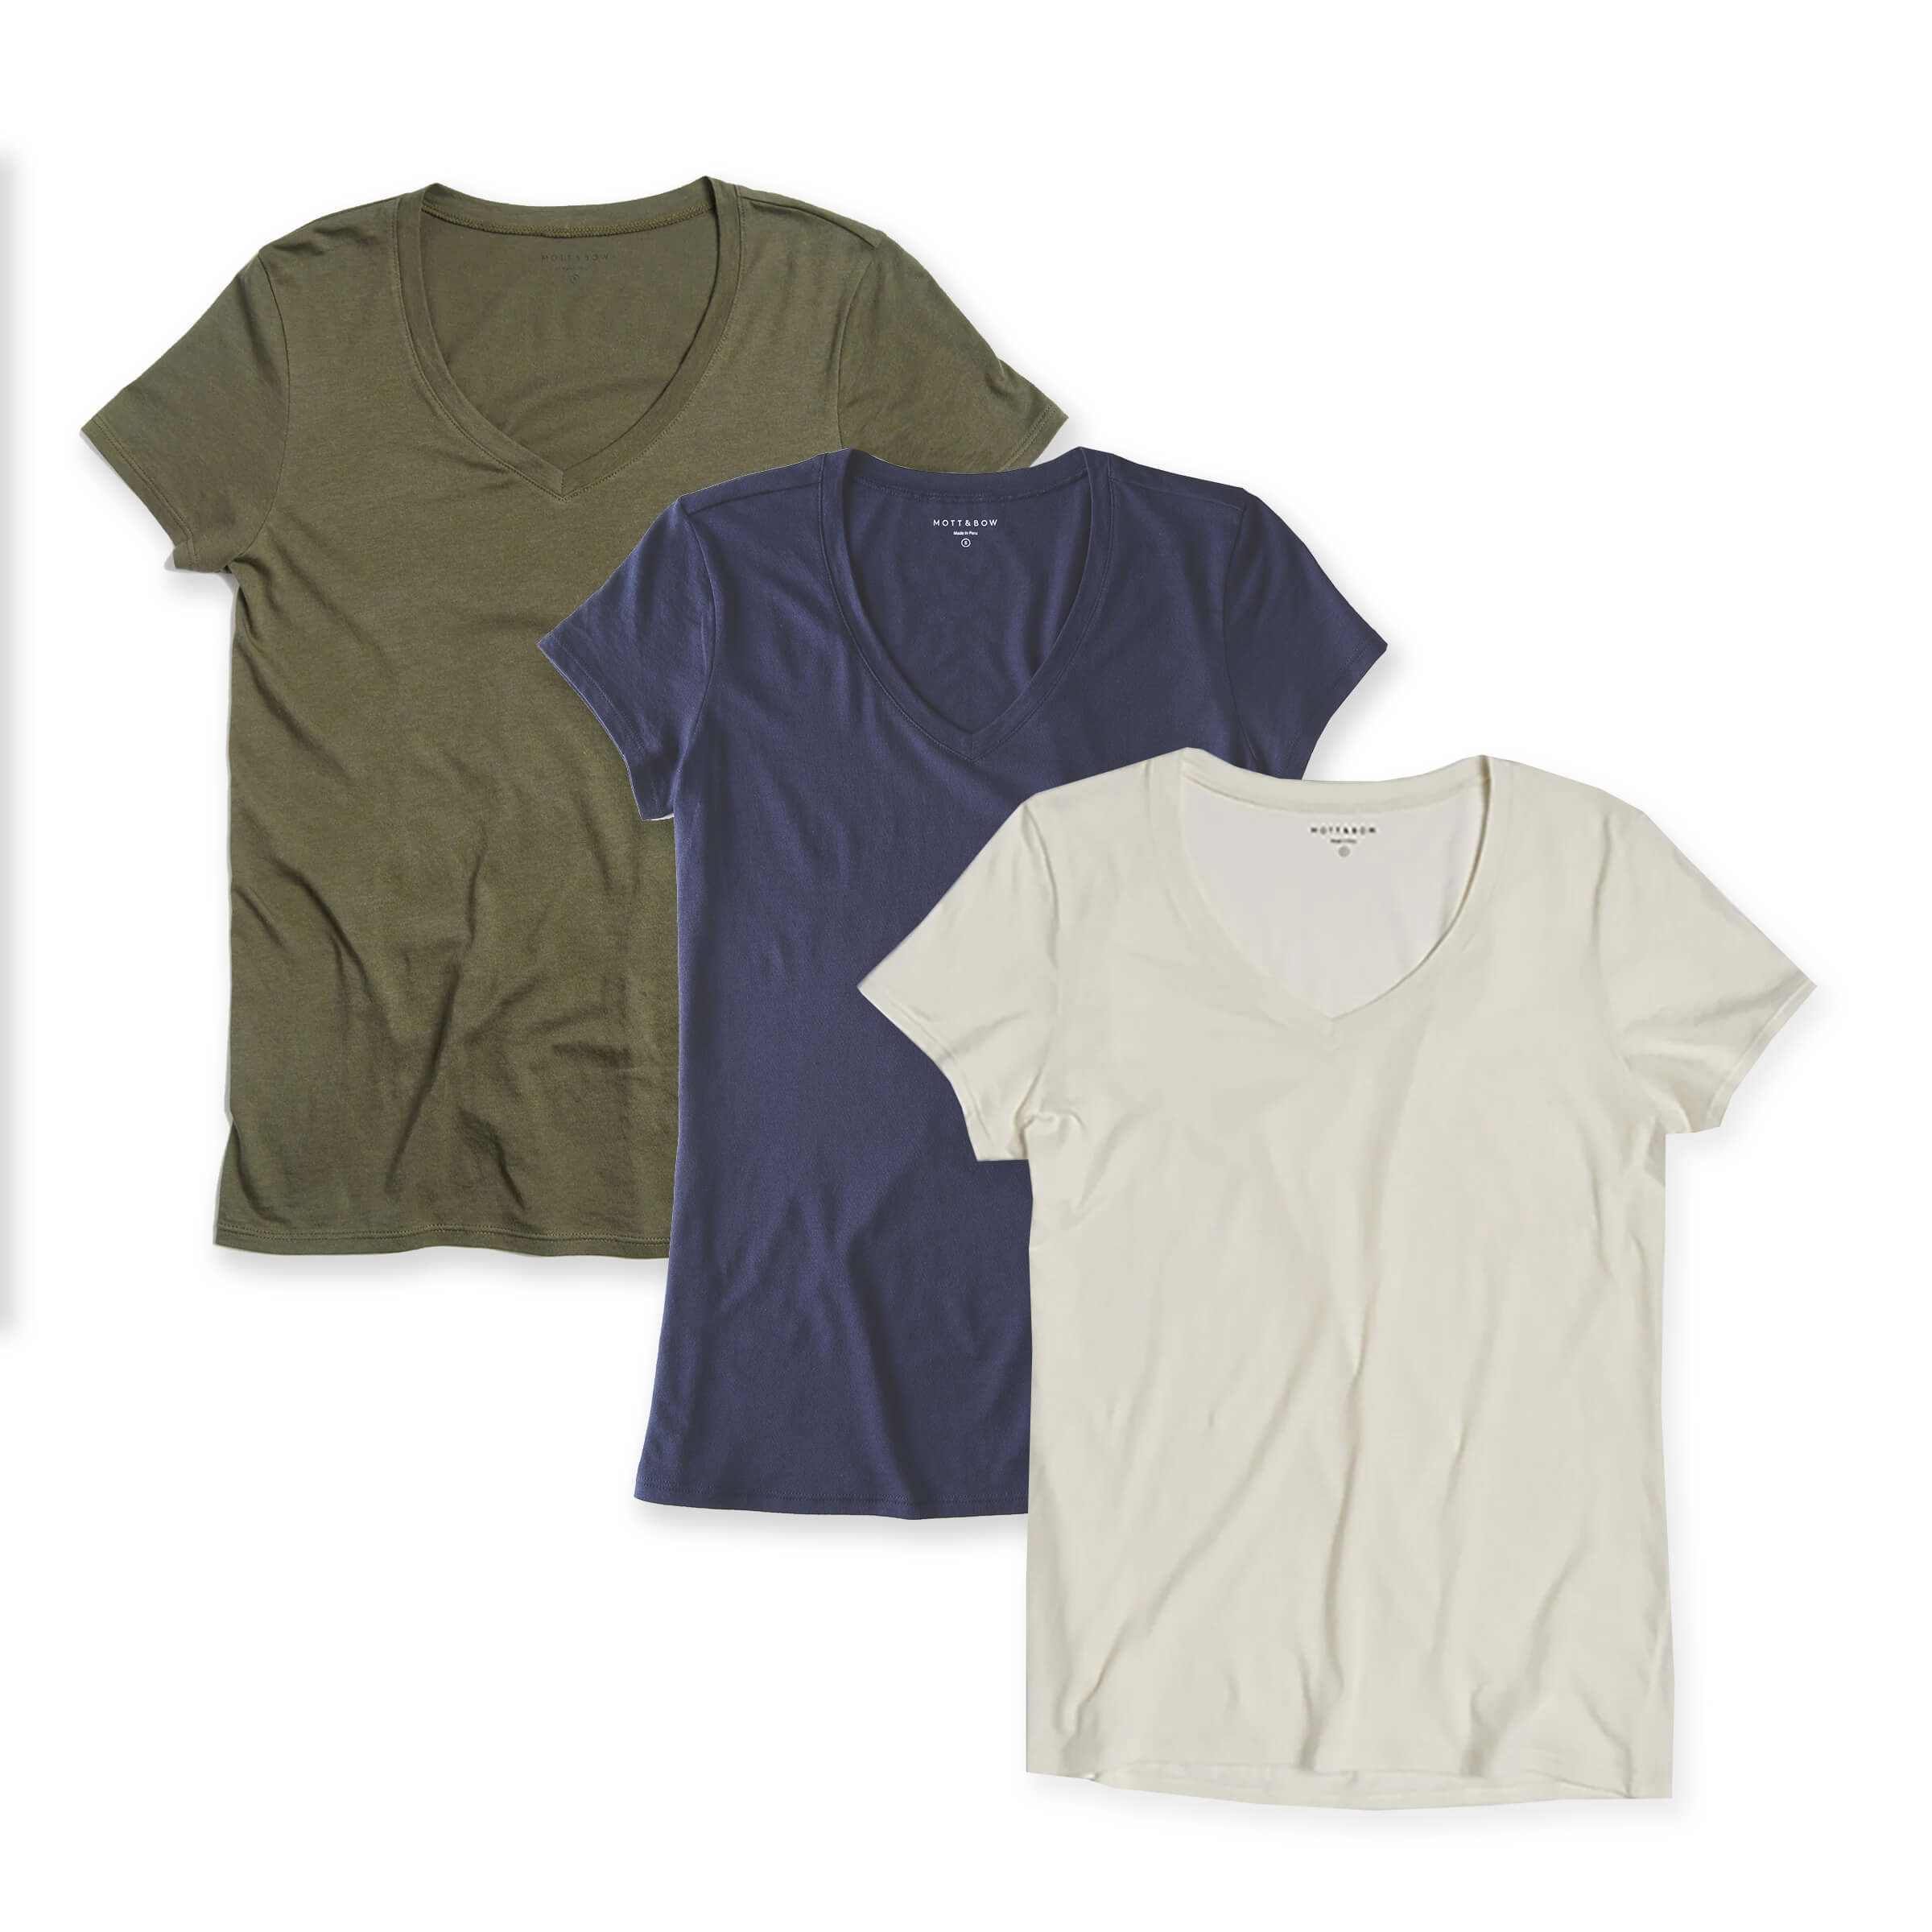 Women wearing Verde militar/Azul marino/Blanco vintage Fitted V-Neck Marcy 3-Pack tees